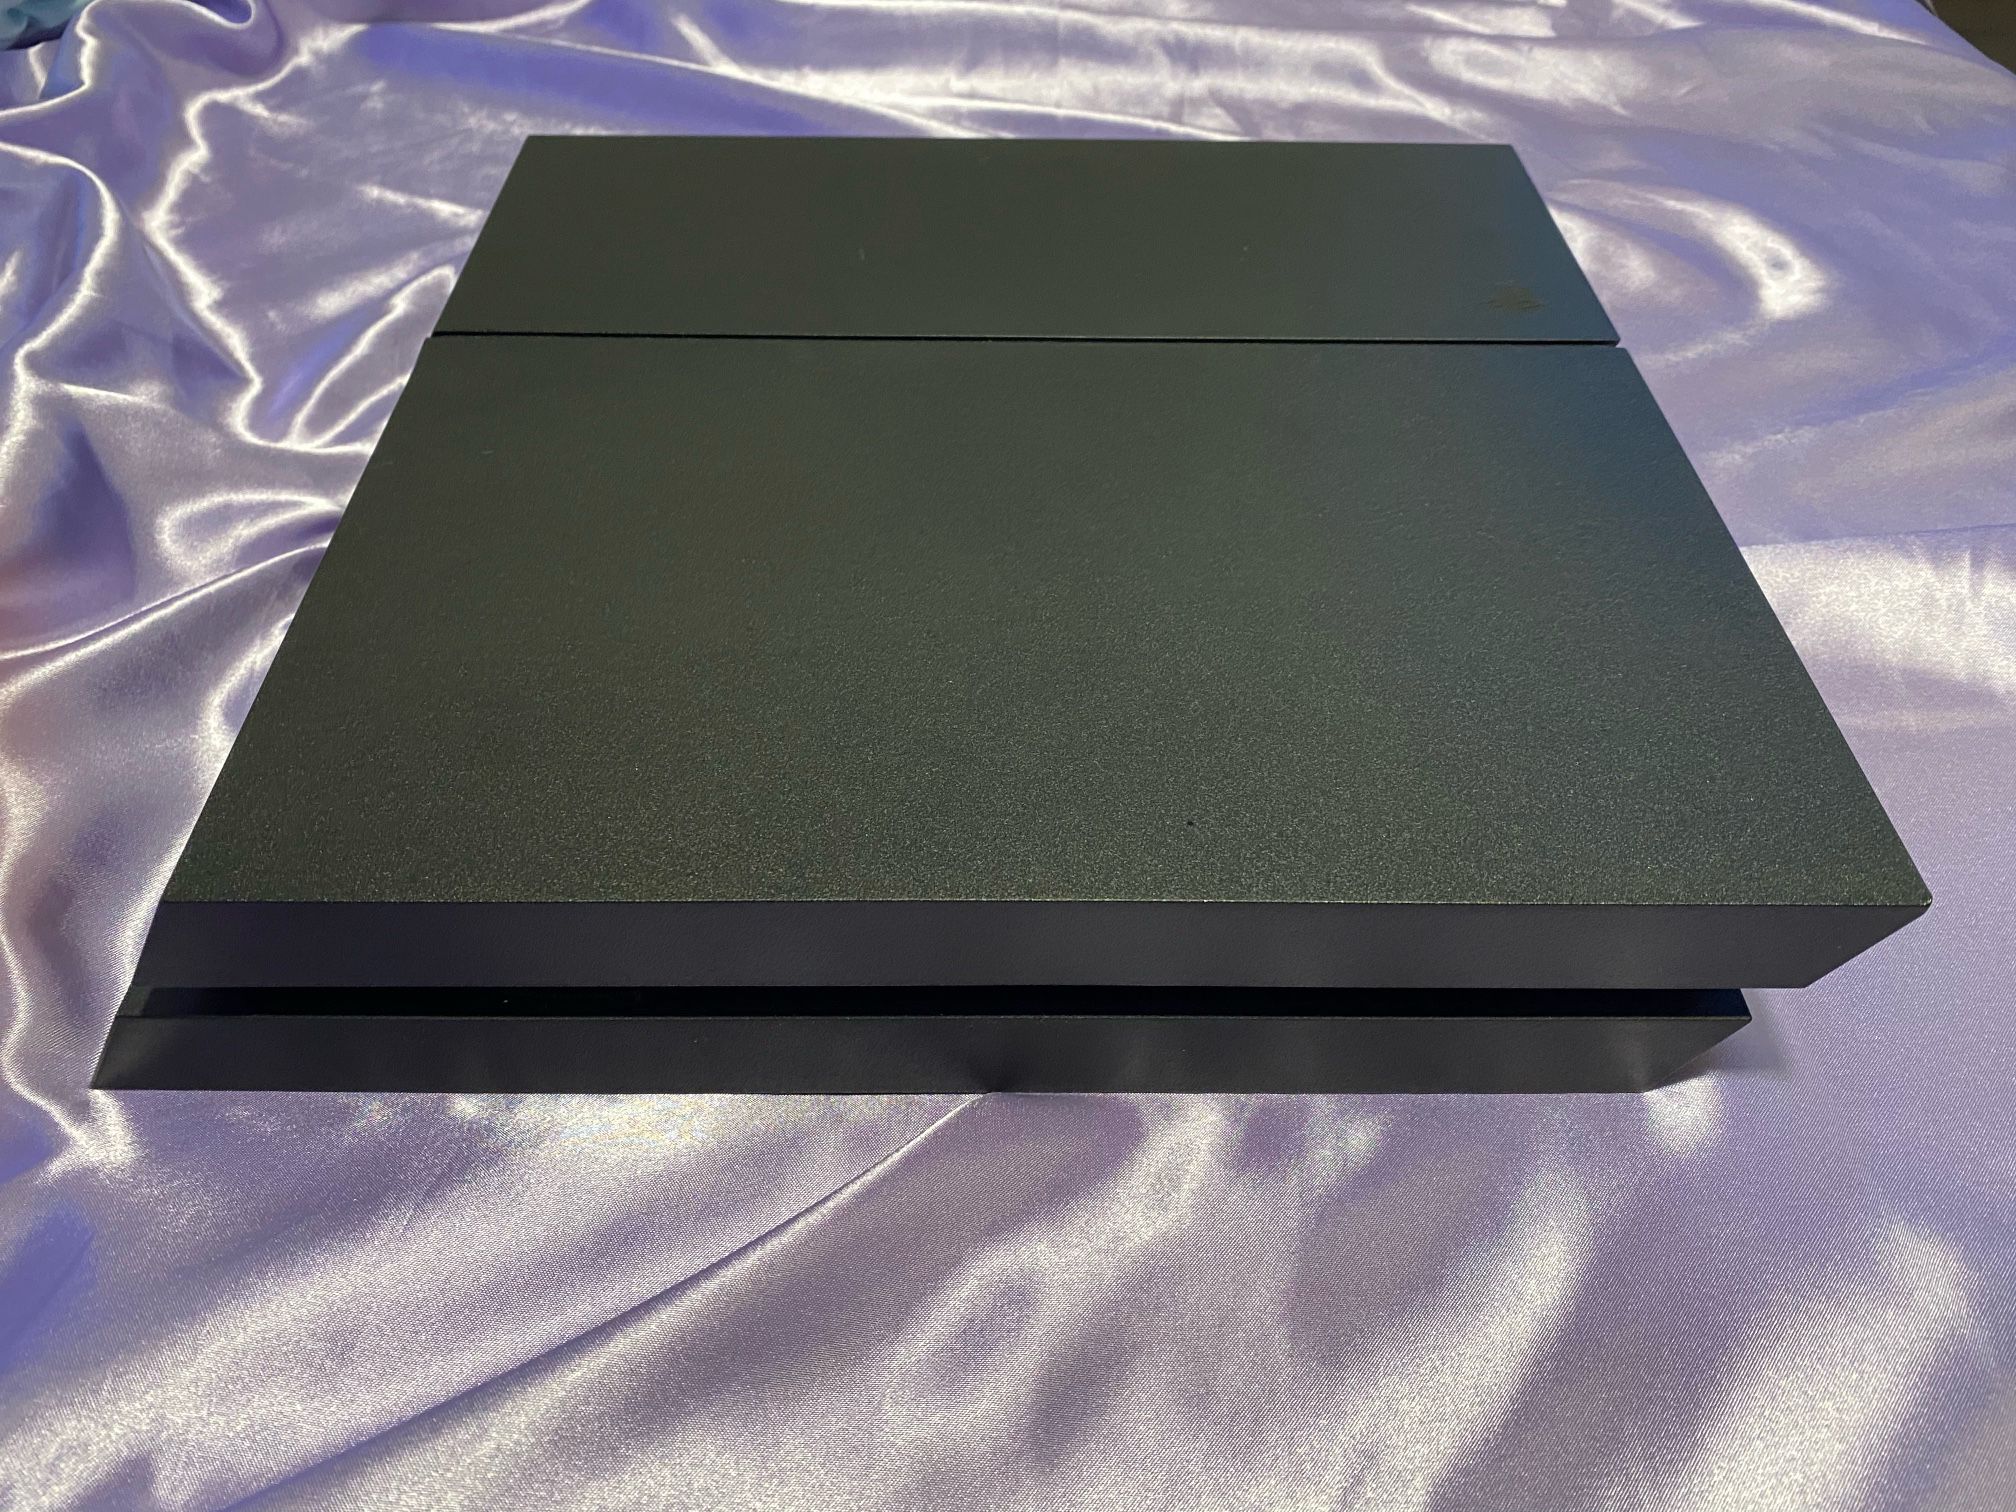 PS4 for sale!